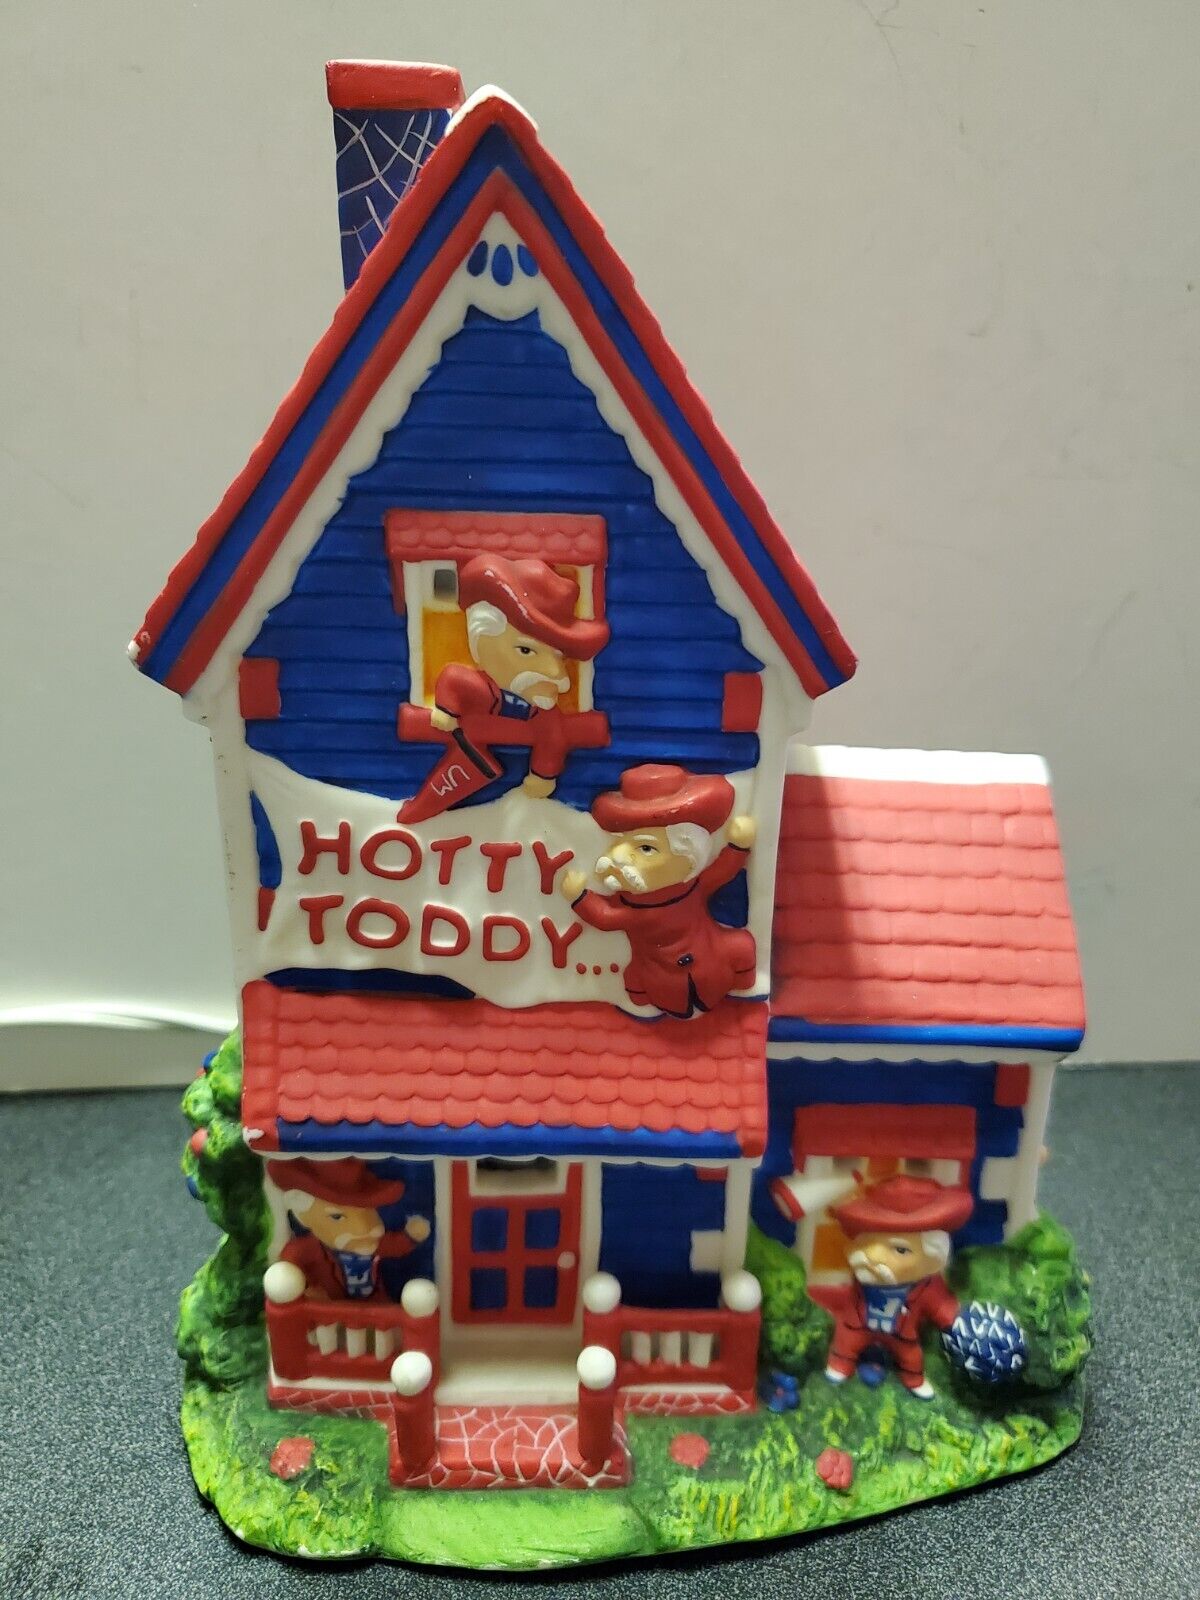 Ole Miss Hotty Toddy Limited Edition Mascot Lighted Porcelain House.